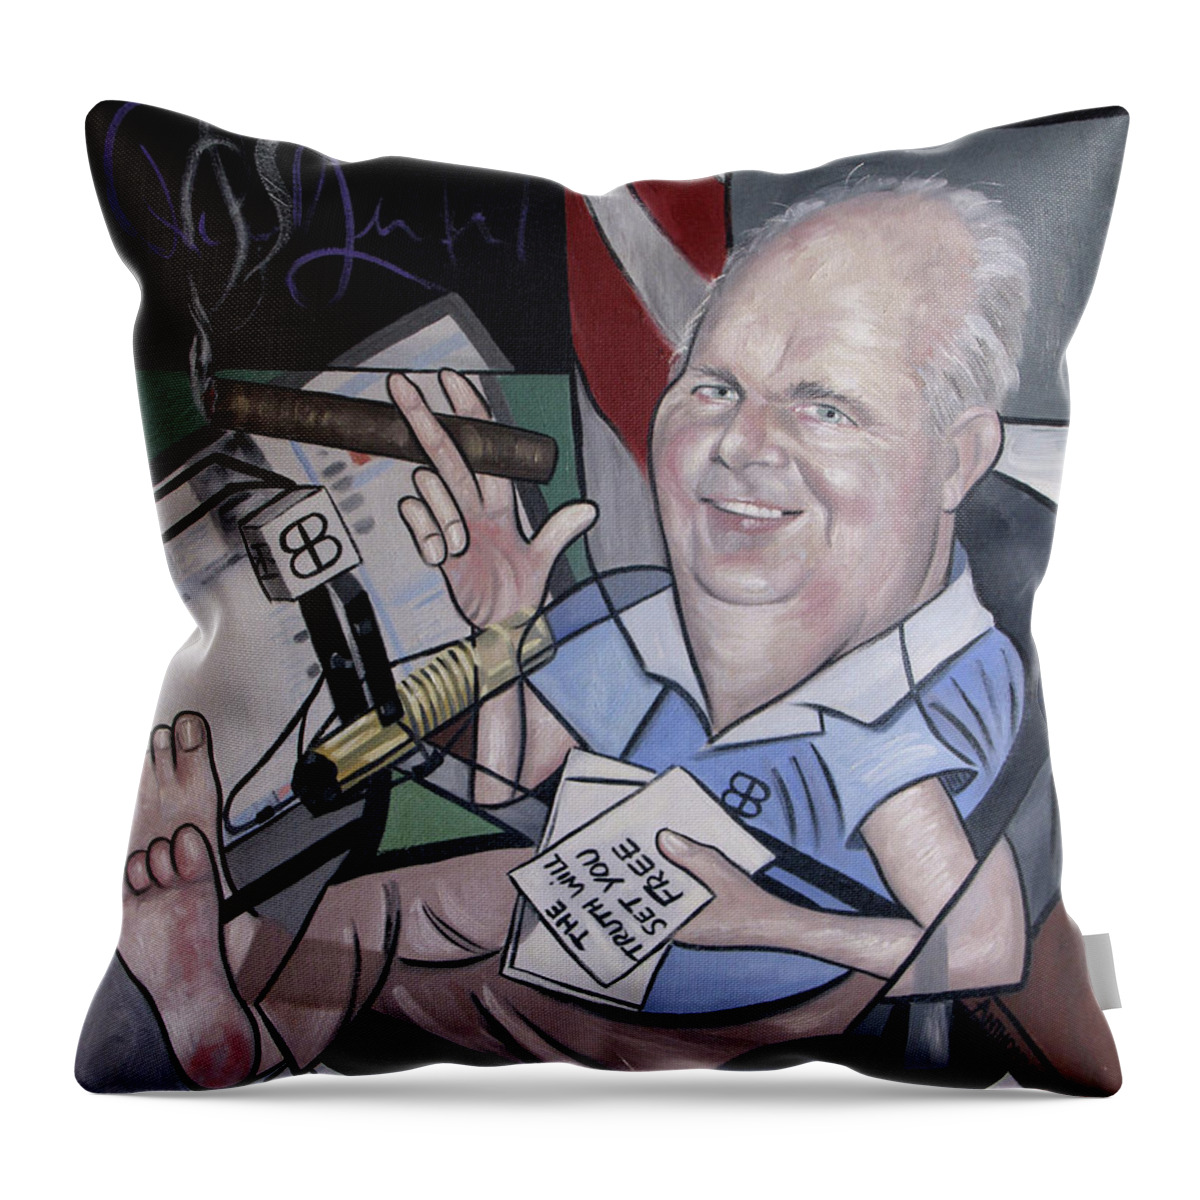 Rush Limbaugh Throw Pillow featuring the painting Rush Limbough, Talent On Loan From God by Anthony Falbo